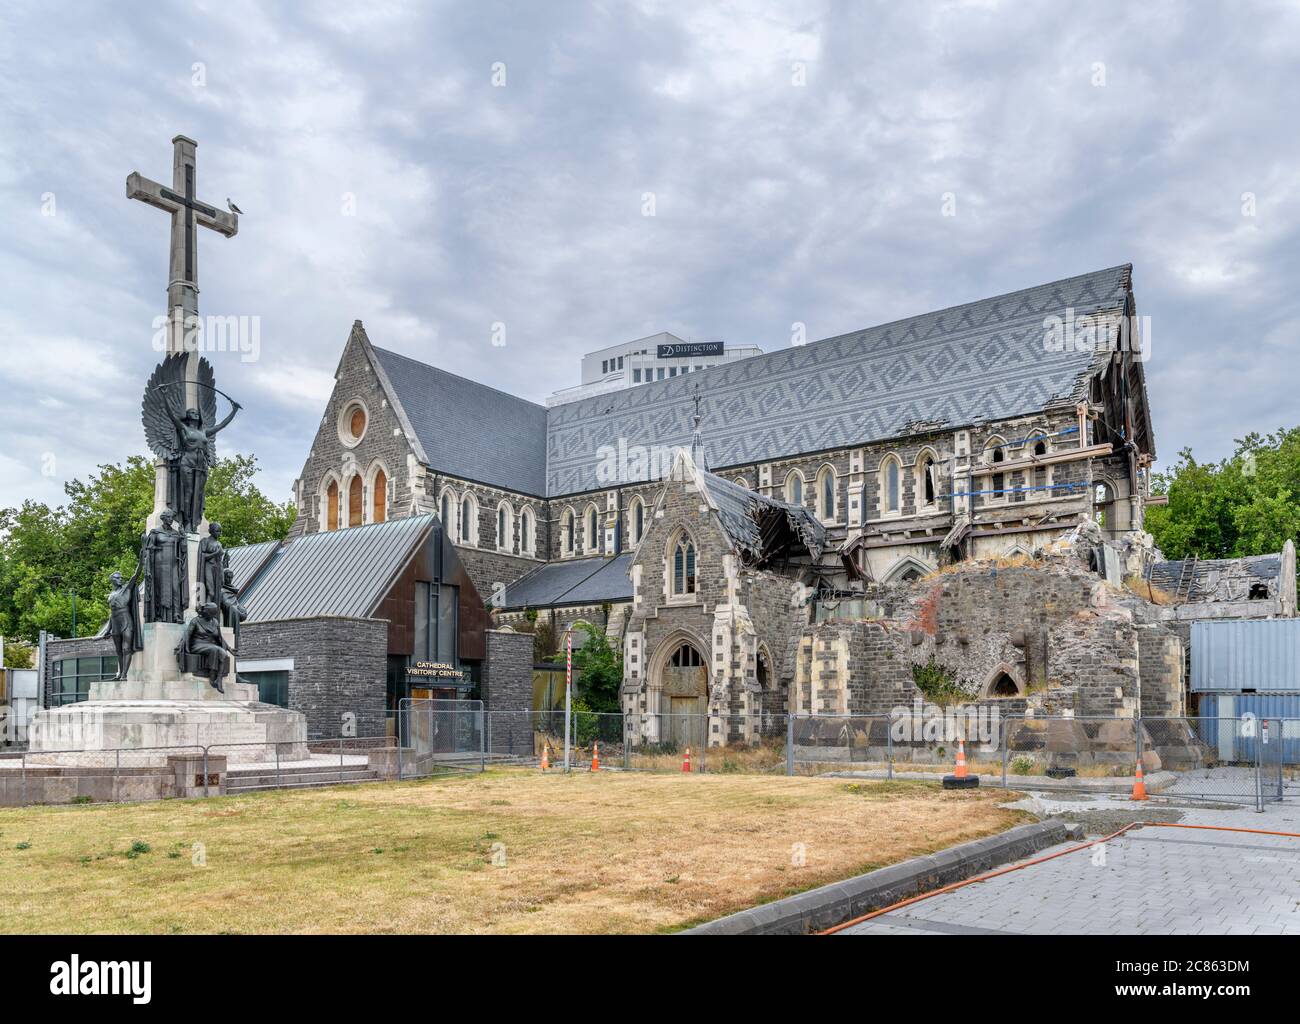 The ruins of Christchurch Cathedral, damaged in the earthquake of February 2011, Christchurch, New Zealand Stock Photo